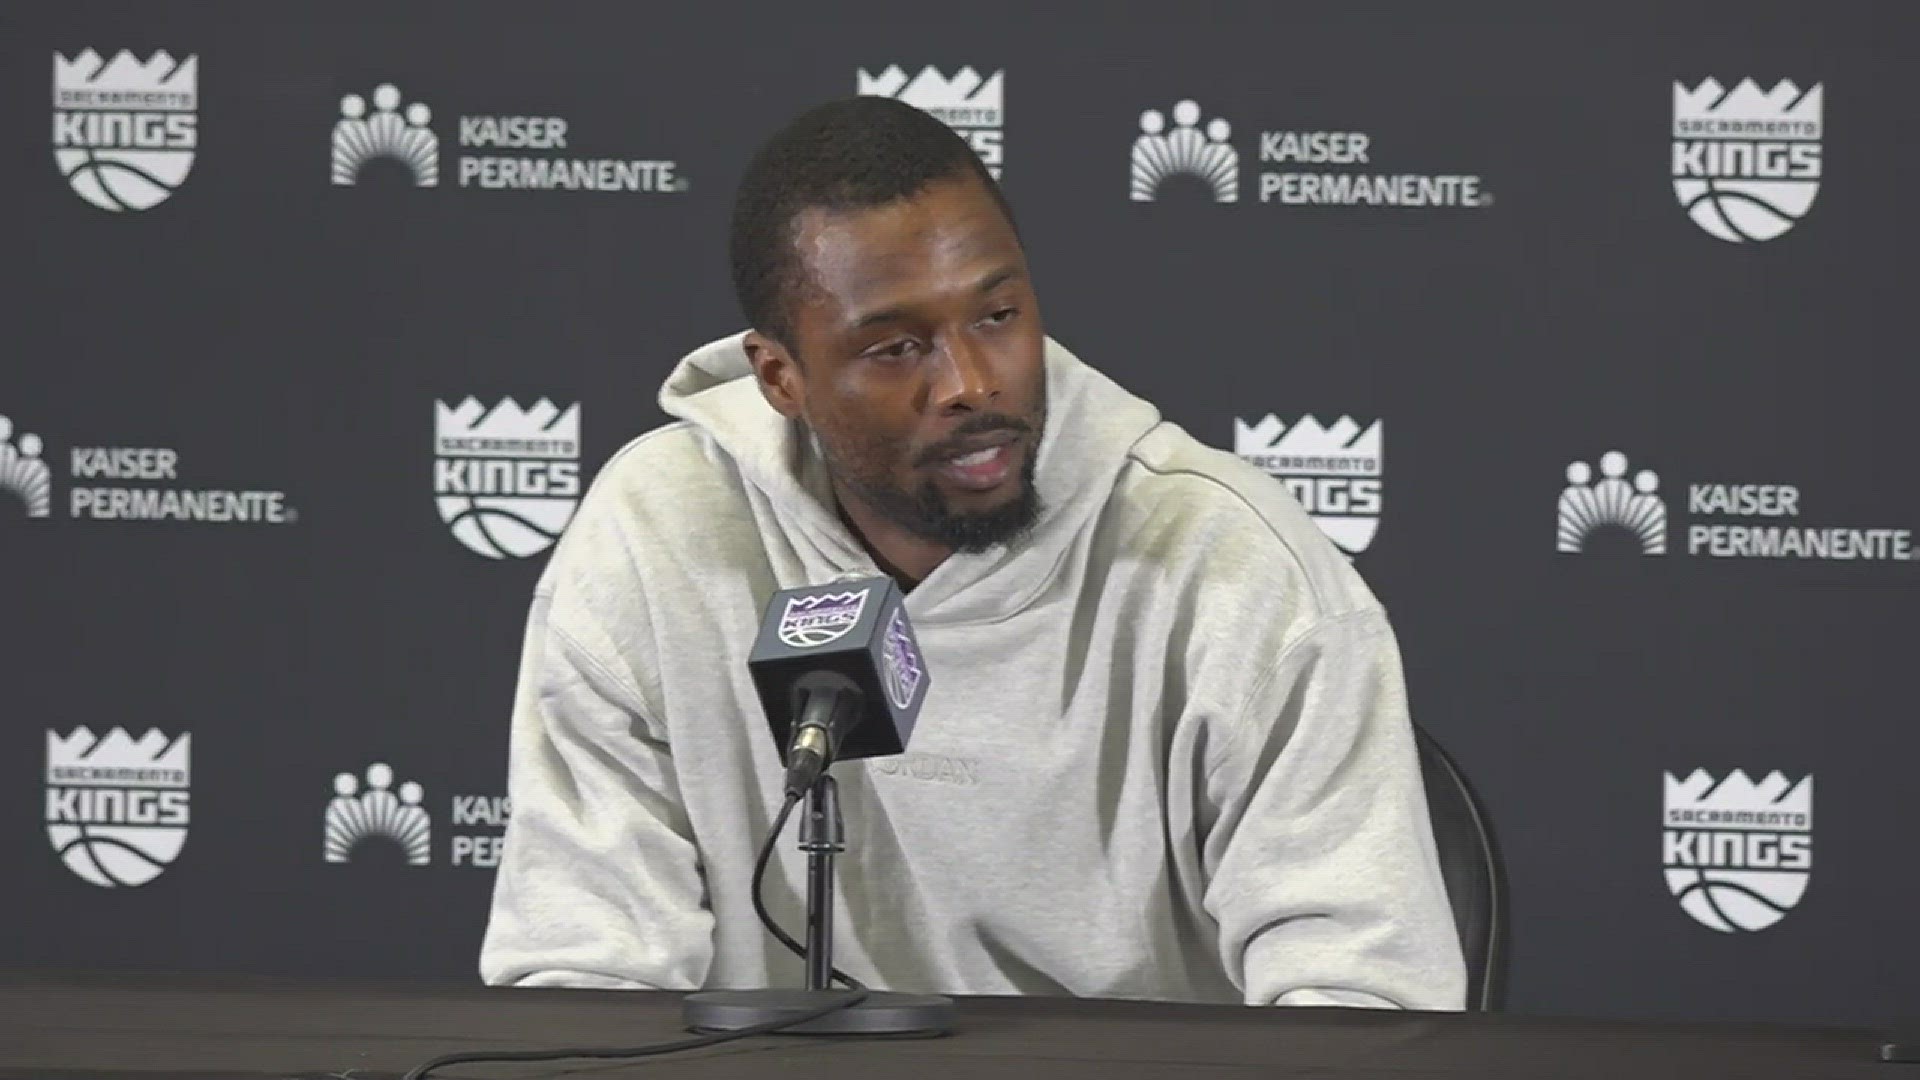 Sacramento Kings veteran Harrison Barnes speaks about what the future holds for the Kings and how he's approaching the offseason as he heads into free agency.